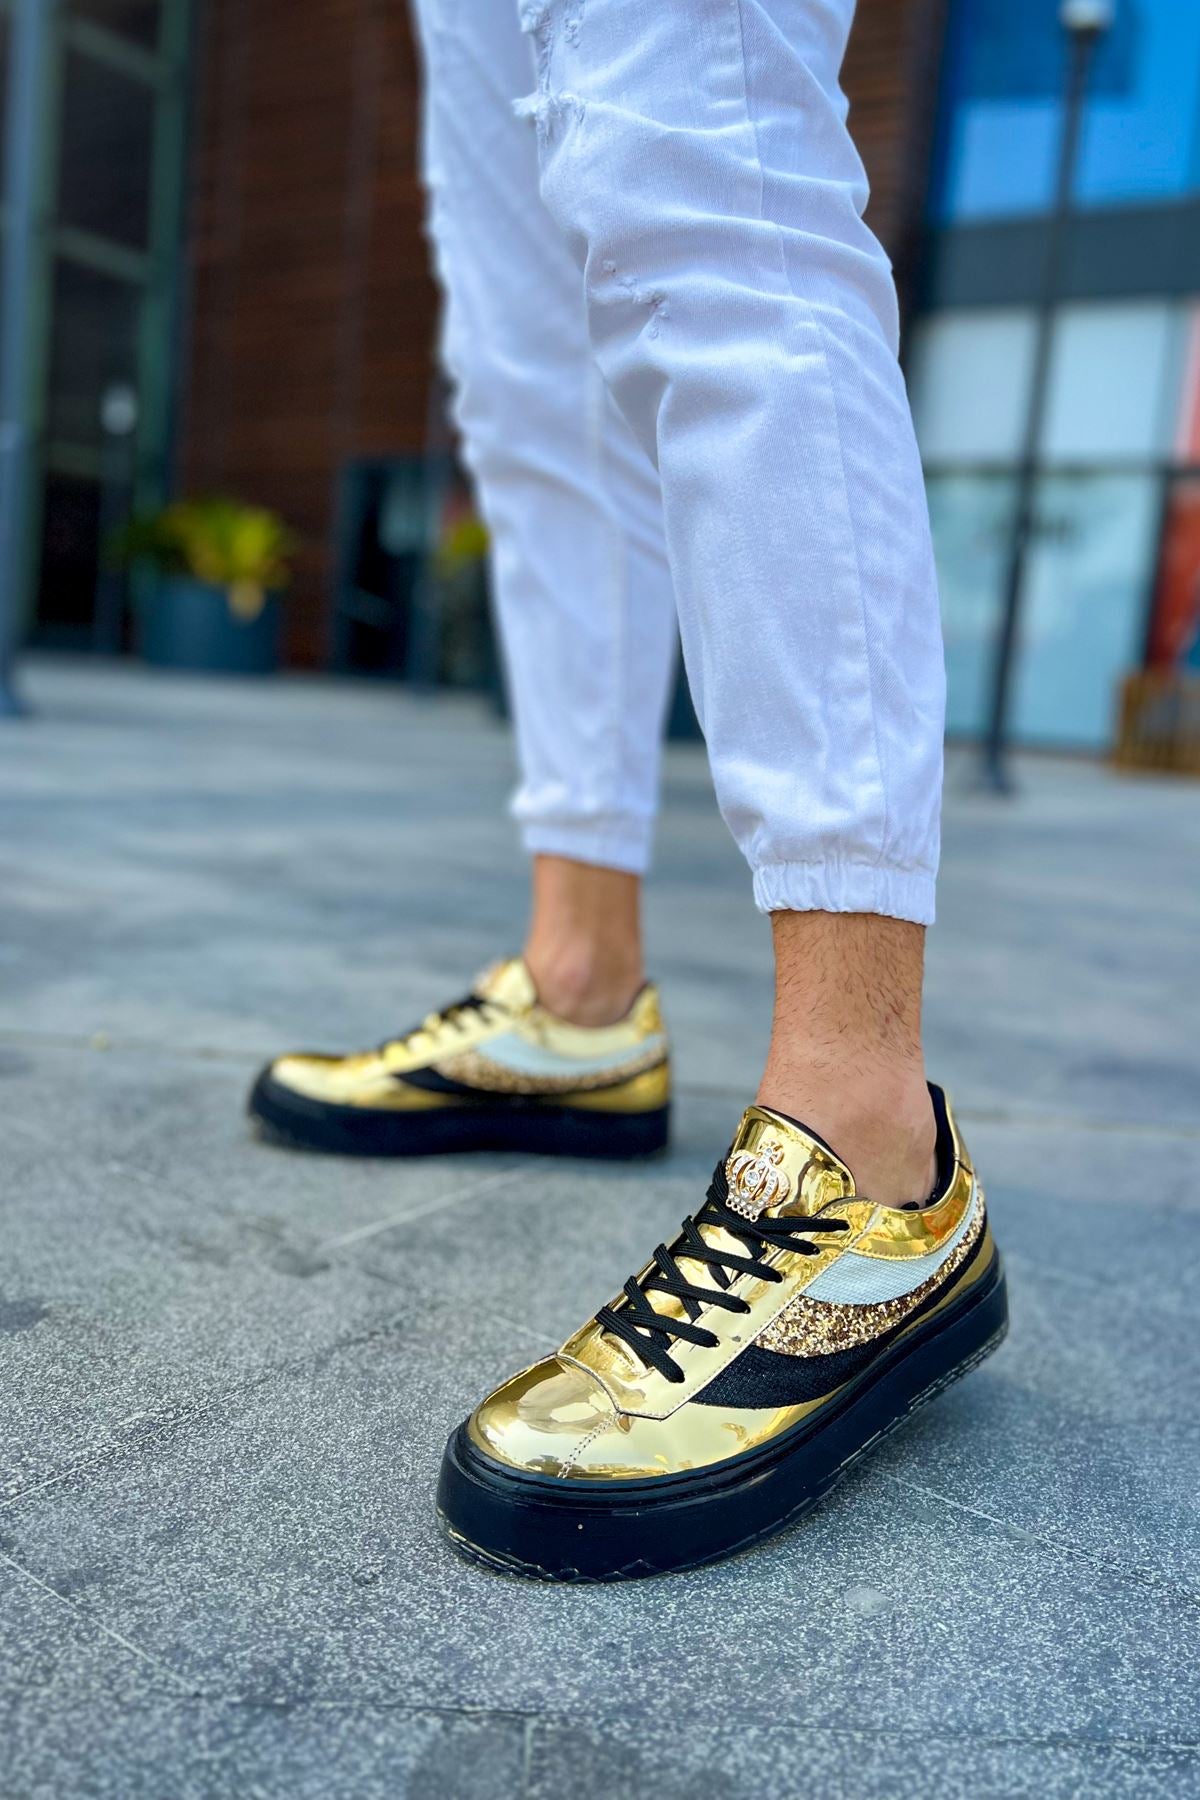 CH975 Majesty ST Men's sneaker Shoes GOLD - STREETMODE™